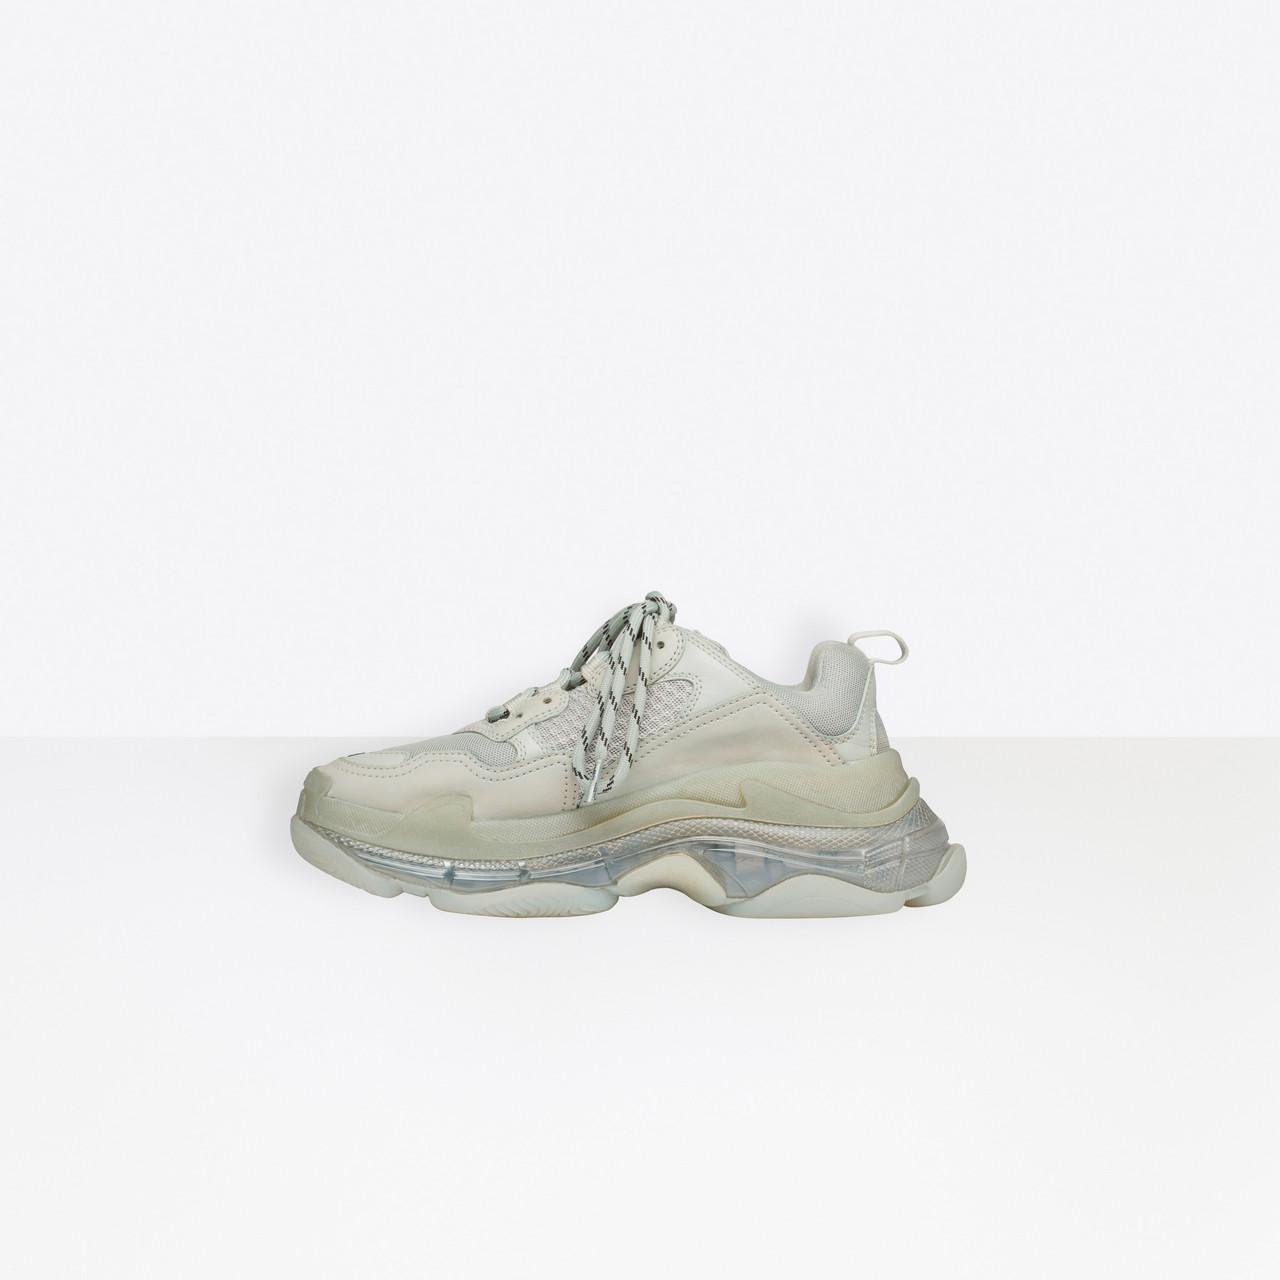 Balenciaga Synthetic Triple S Clear Sole Trainers in Grey (Gray) - Save 38%  - Lyst